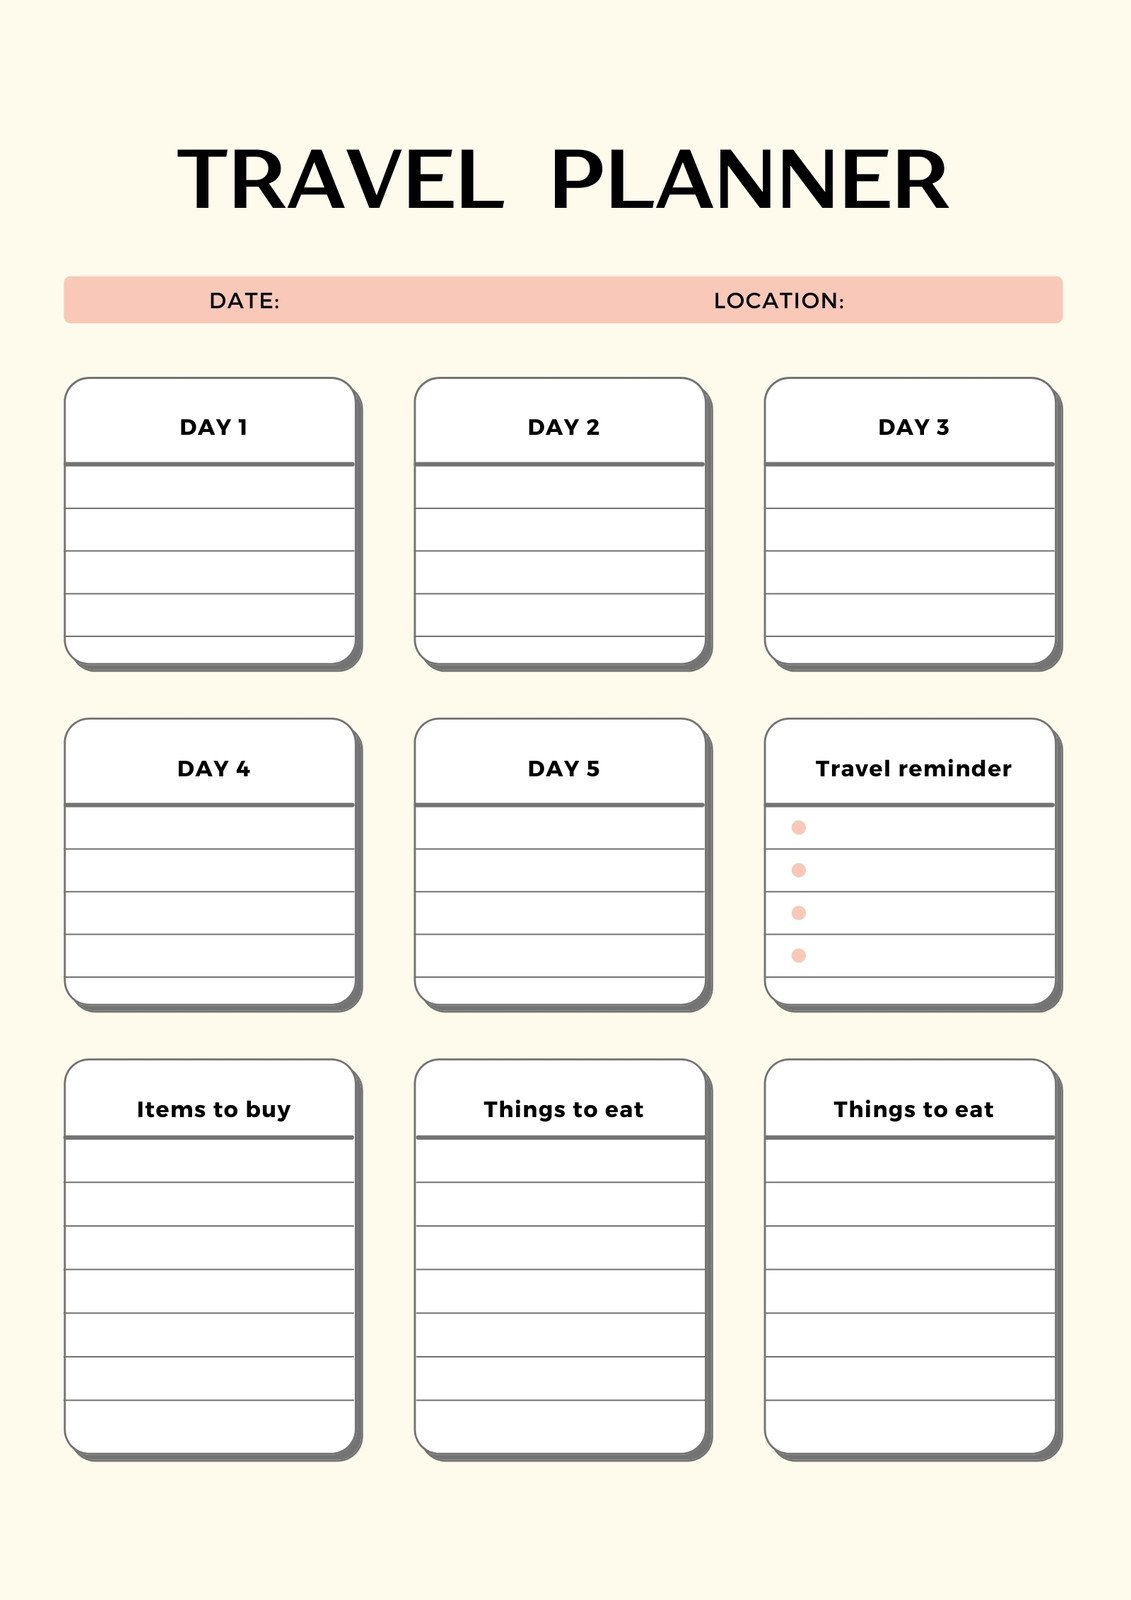 Free And Customizable Itinerary Planner Templates  Canva Inside Blank Trip Itinerary Template